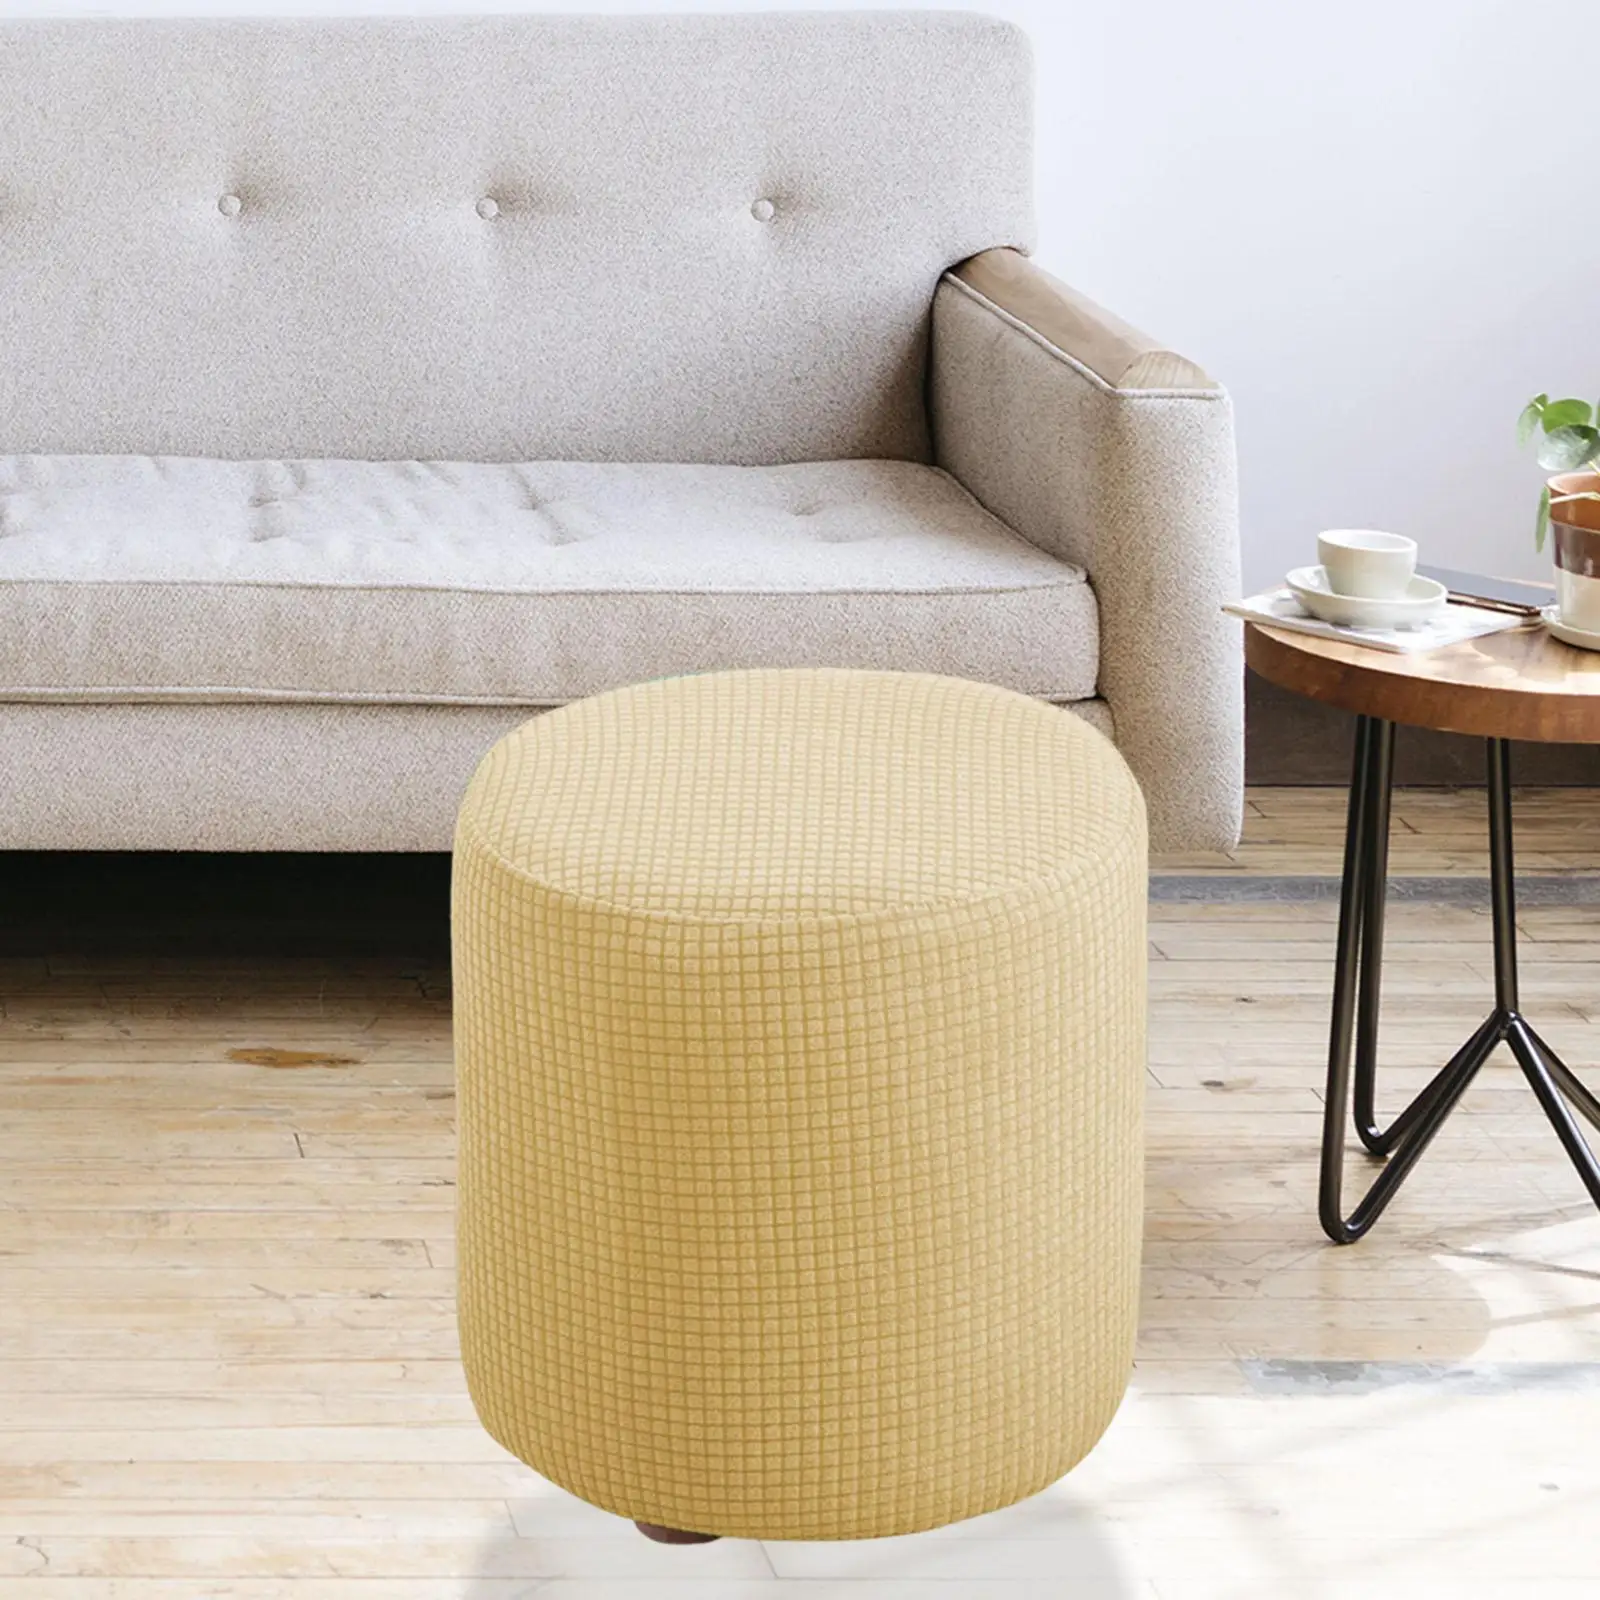 High Stretch Round Ottoman Cover Living Room Storage Ottoman Protect Covers Footstool Slipcover Fits Seat 9.84``-12.60`` inch